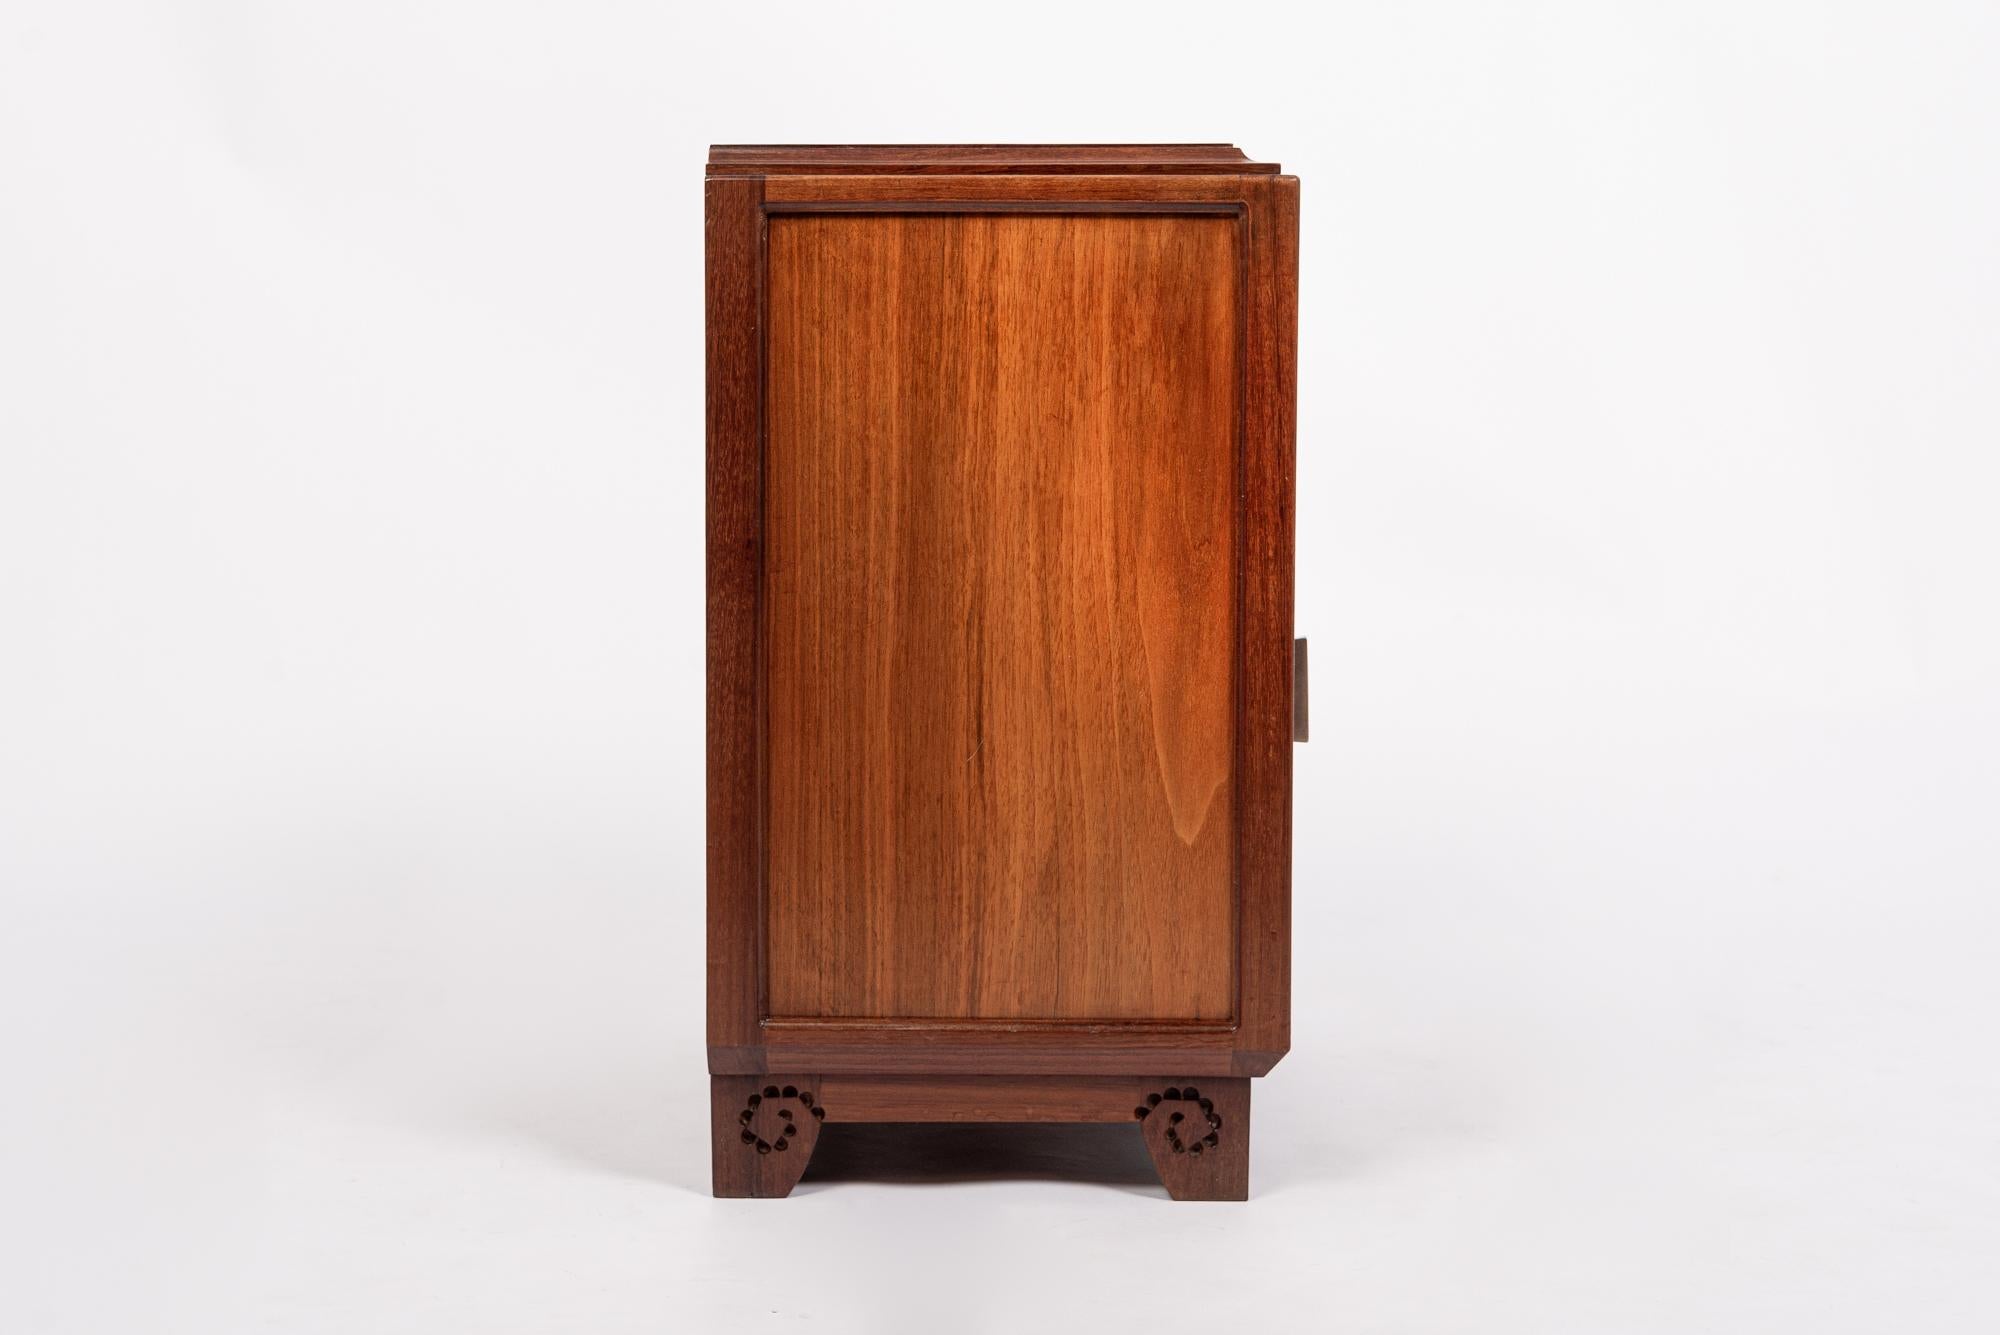 Hand-Carved Antique Art Nouveau Small Wooden Cabinet by Majorelle, France, Signed For Sale